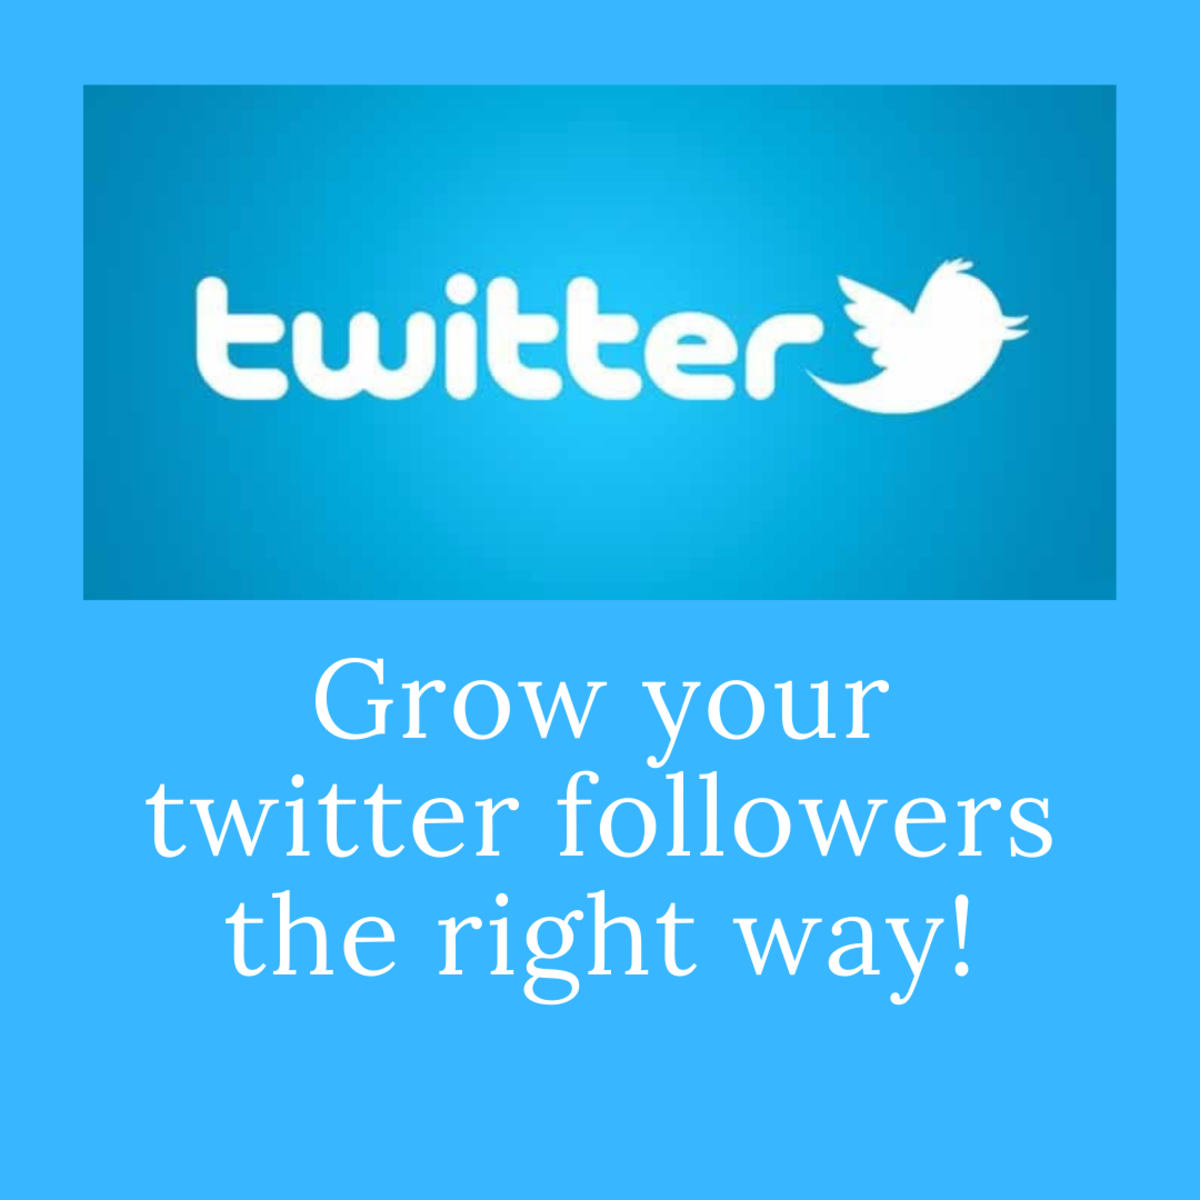 Legit & Effective Tips to Grow Your Twitter Followers